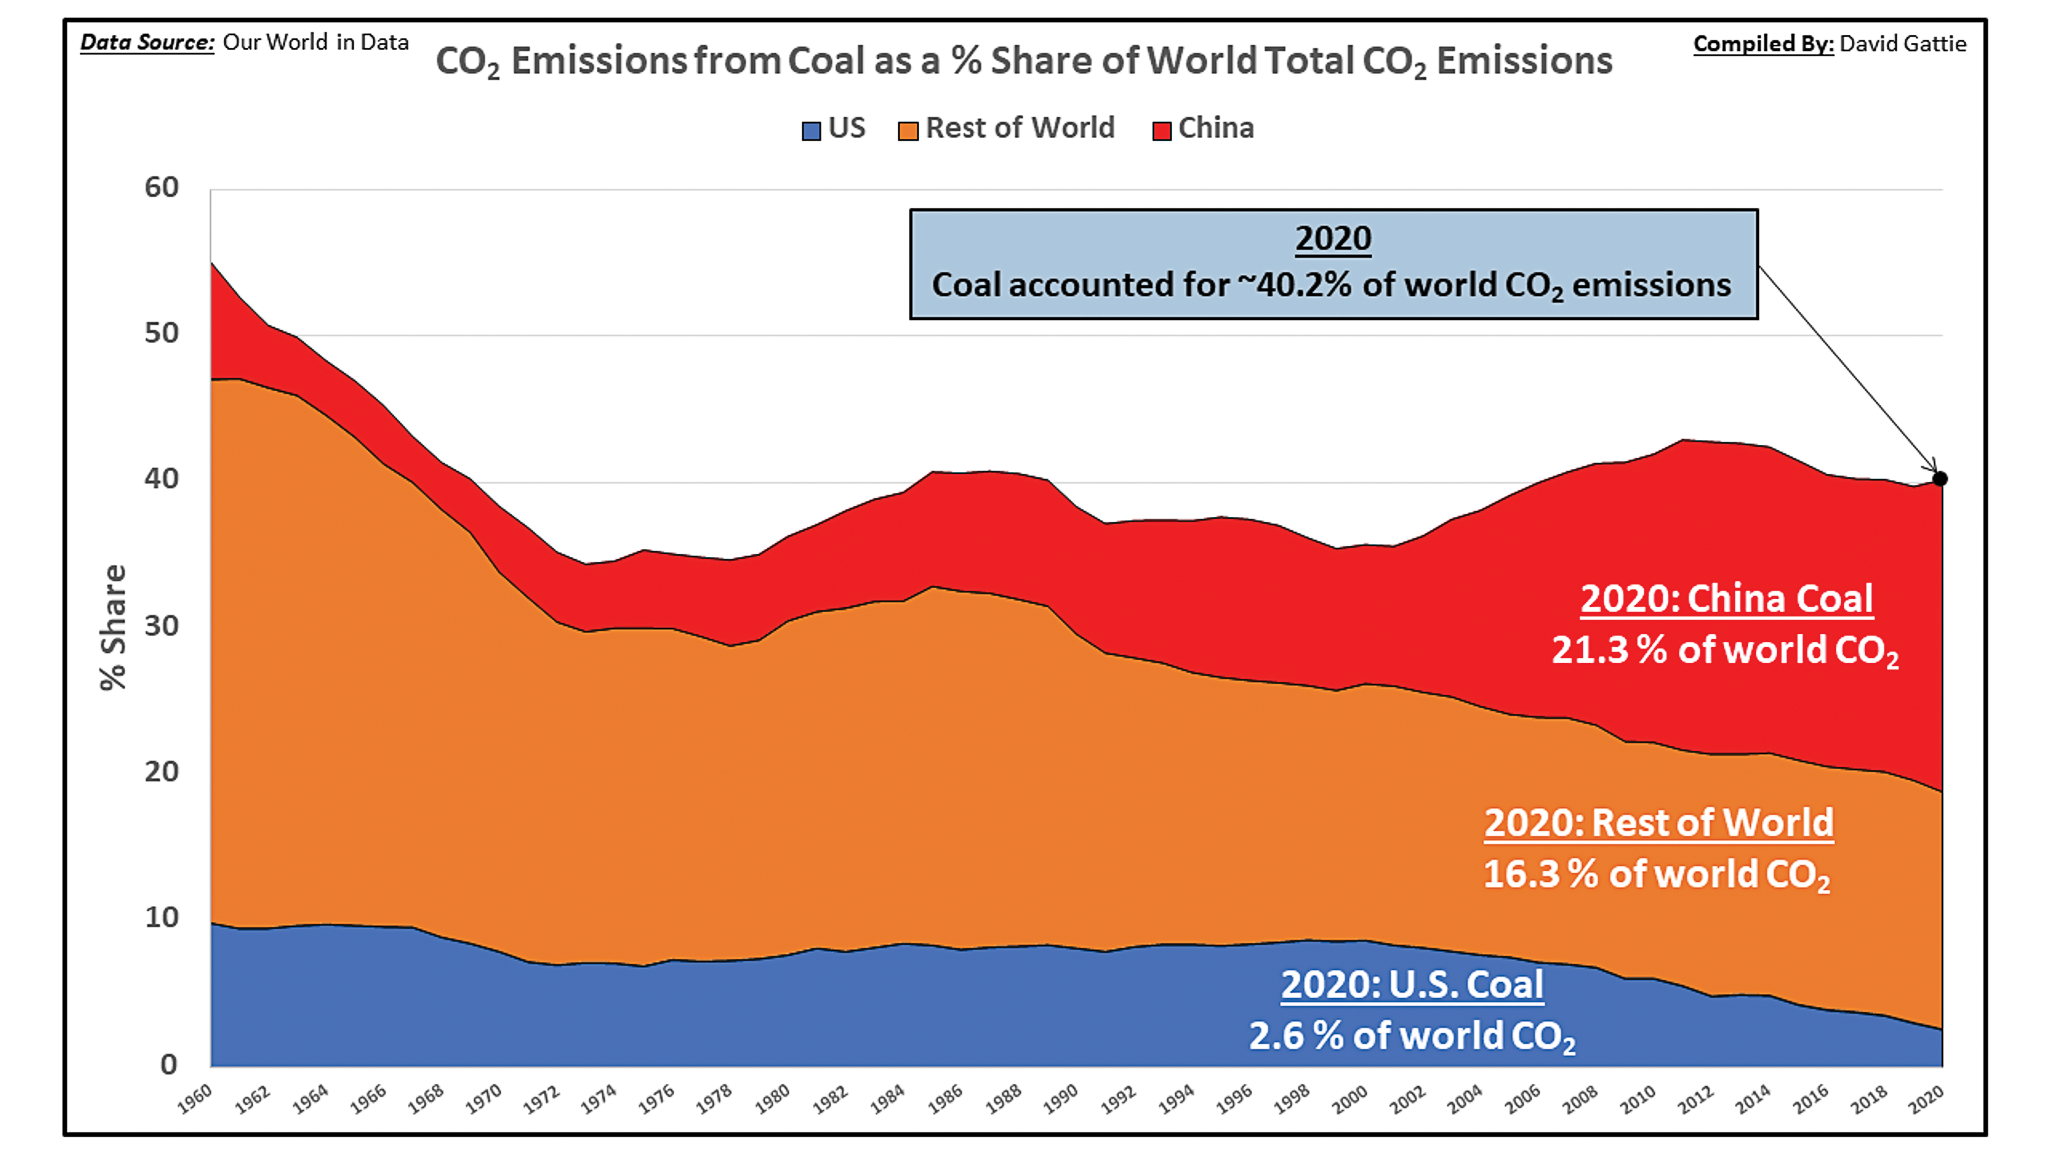 CO2 emissions from coal as a percent share of world total CO2 emissions